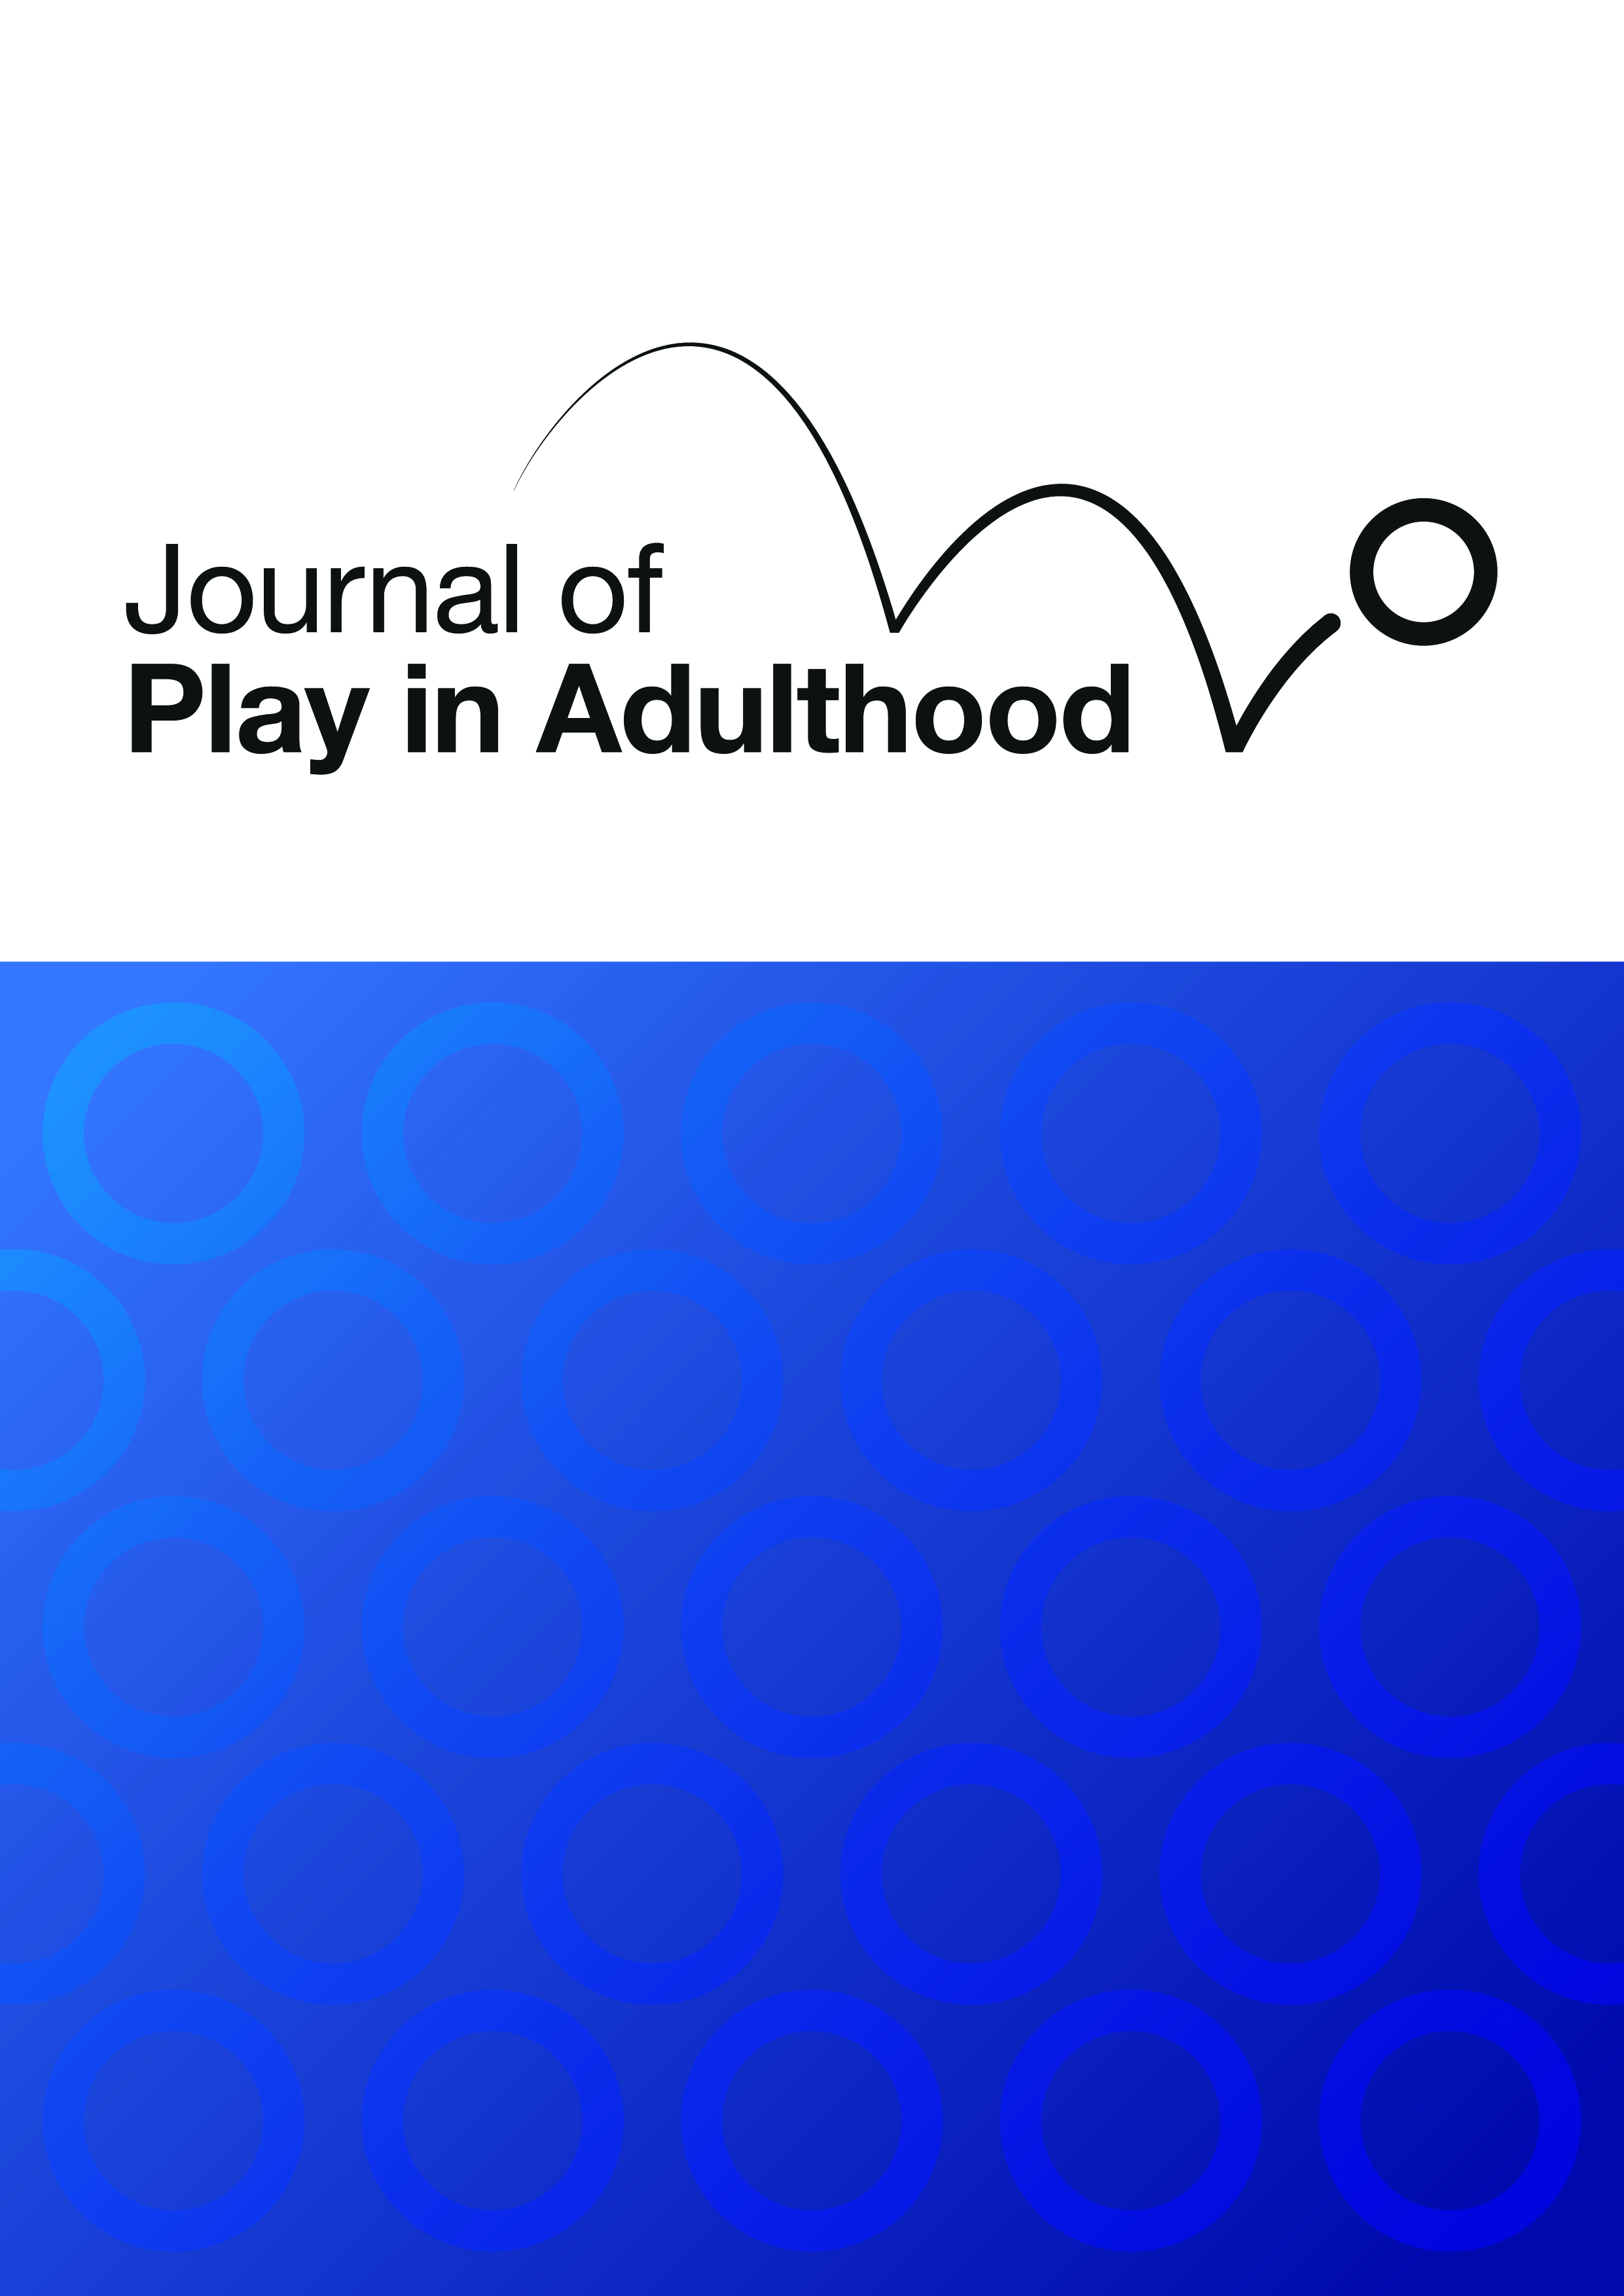 The Journal of Play in Adulthood